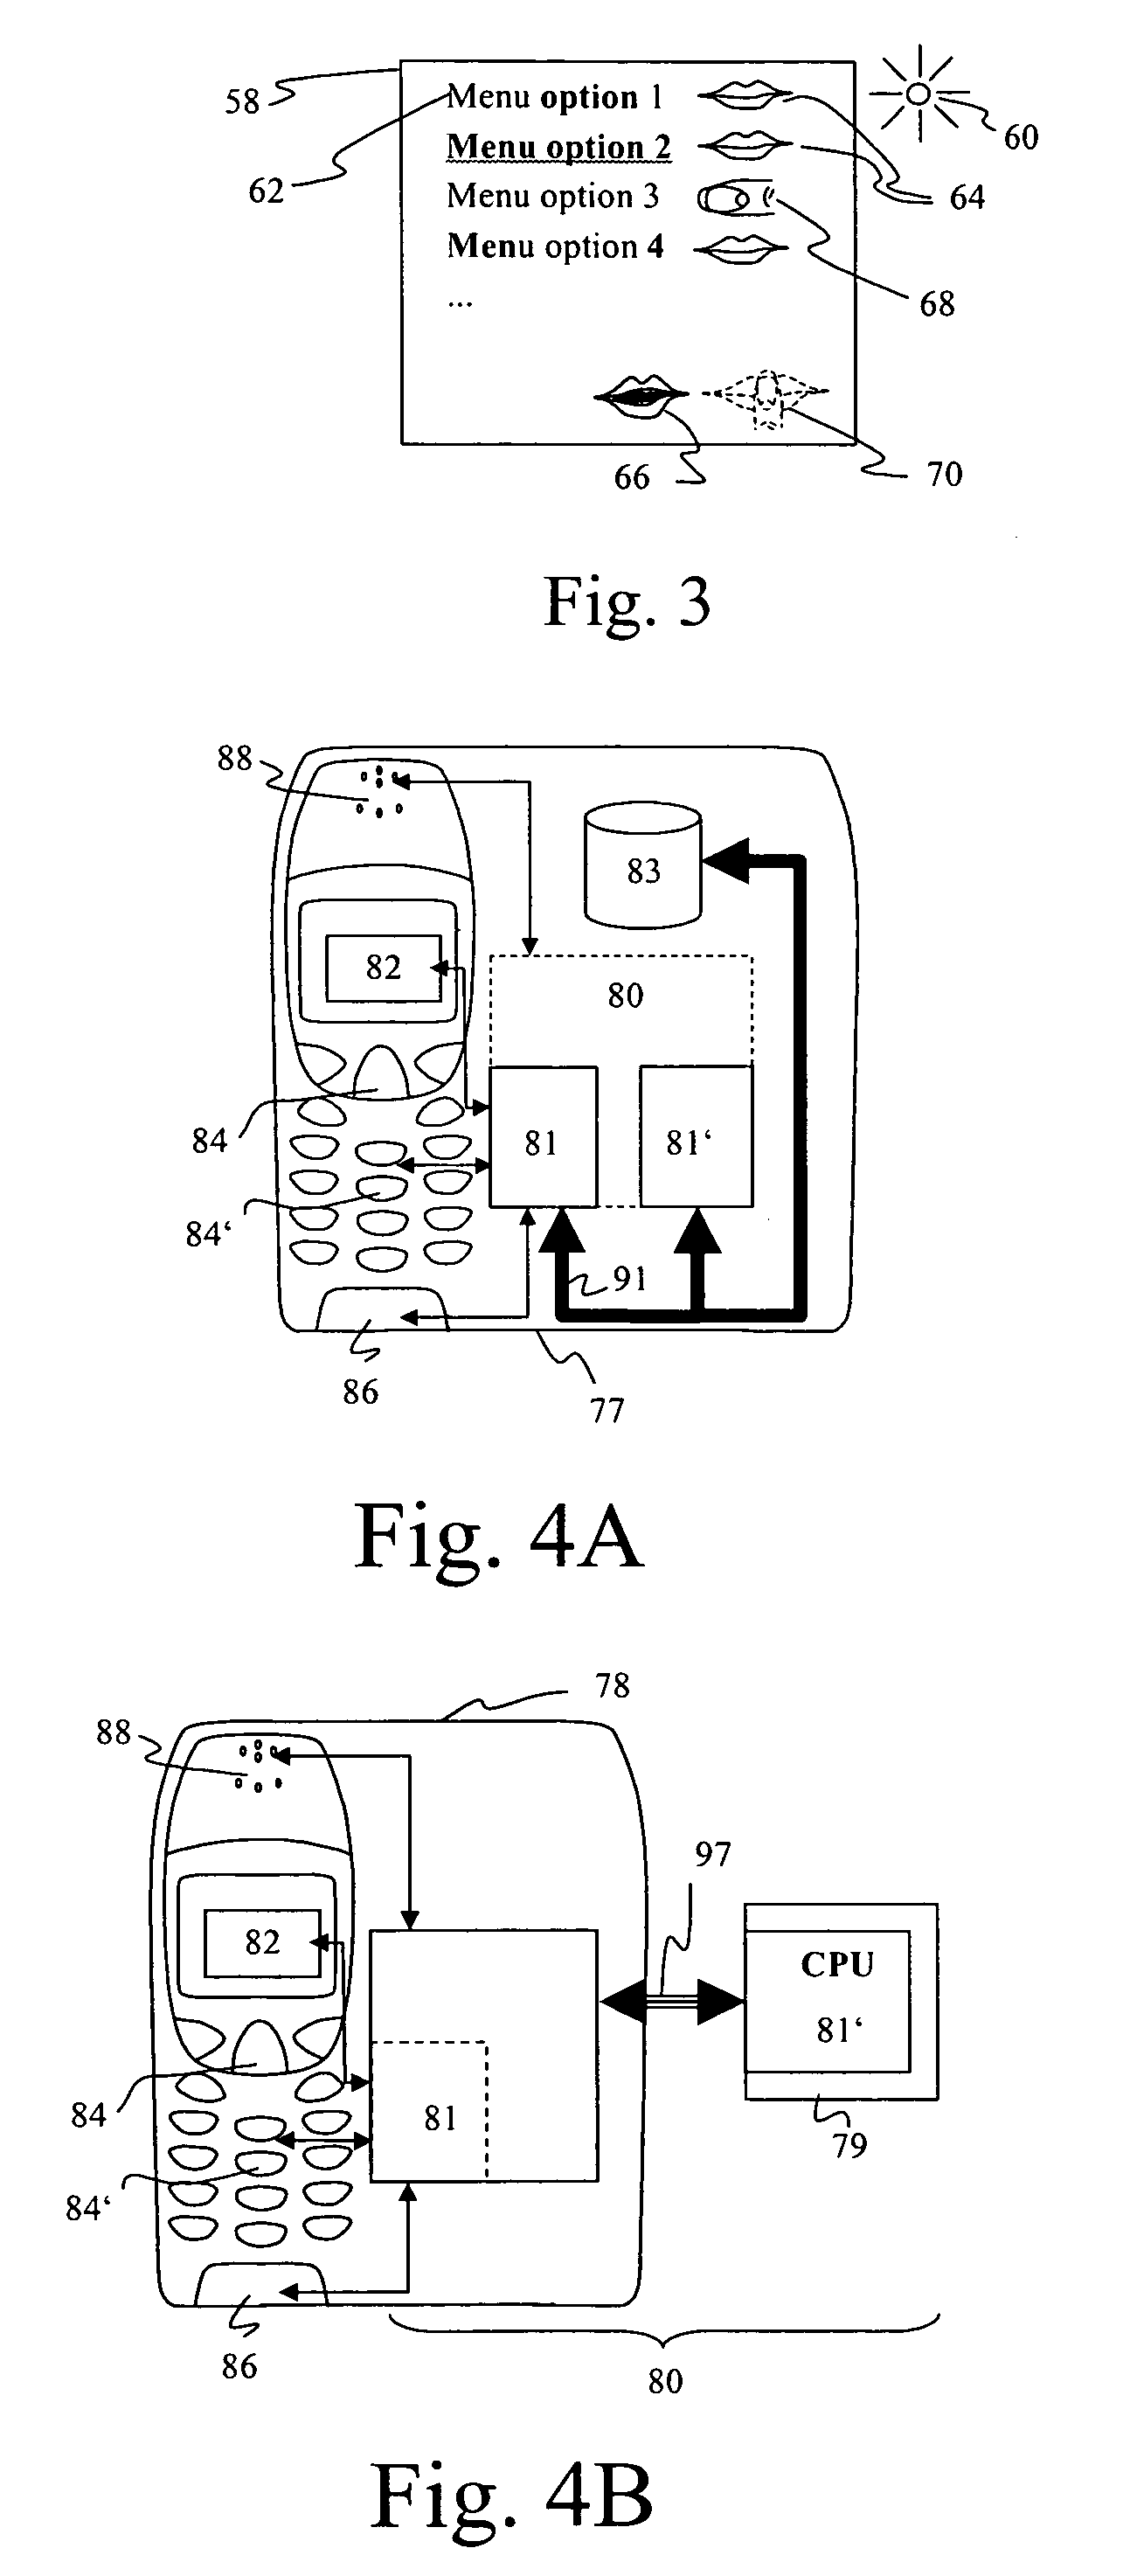 Method and device for providing speech-enabled input in an electronic device having a user interface